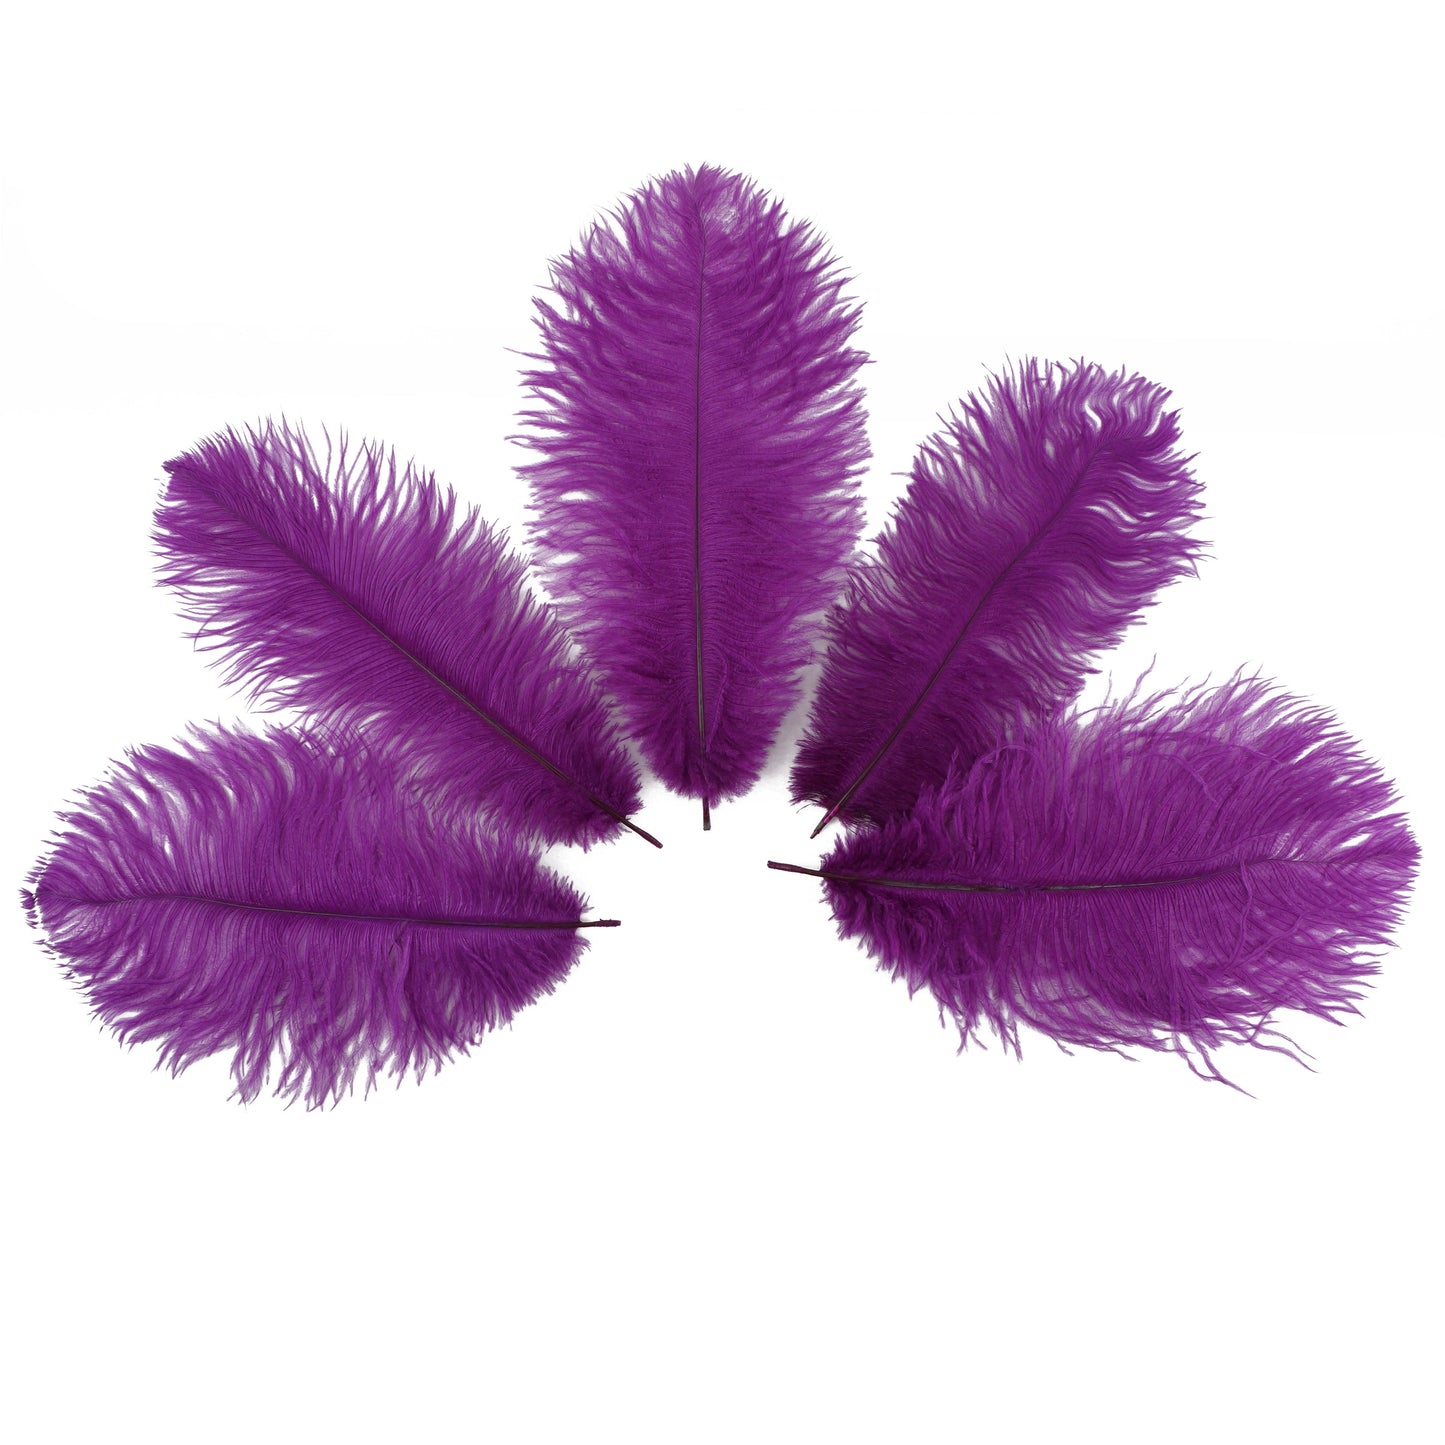 Ostrich Feathers 9-12" Drabs - Very Berry